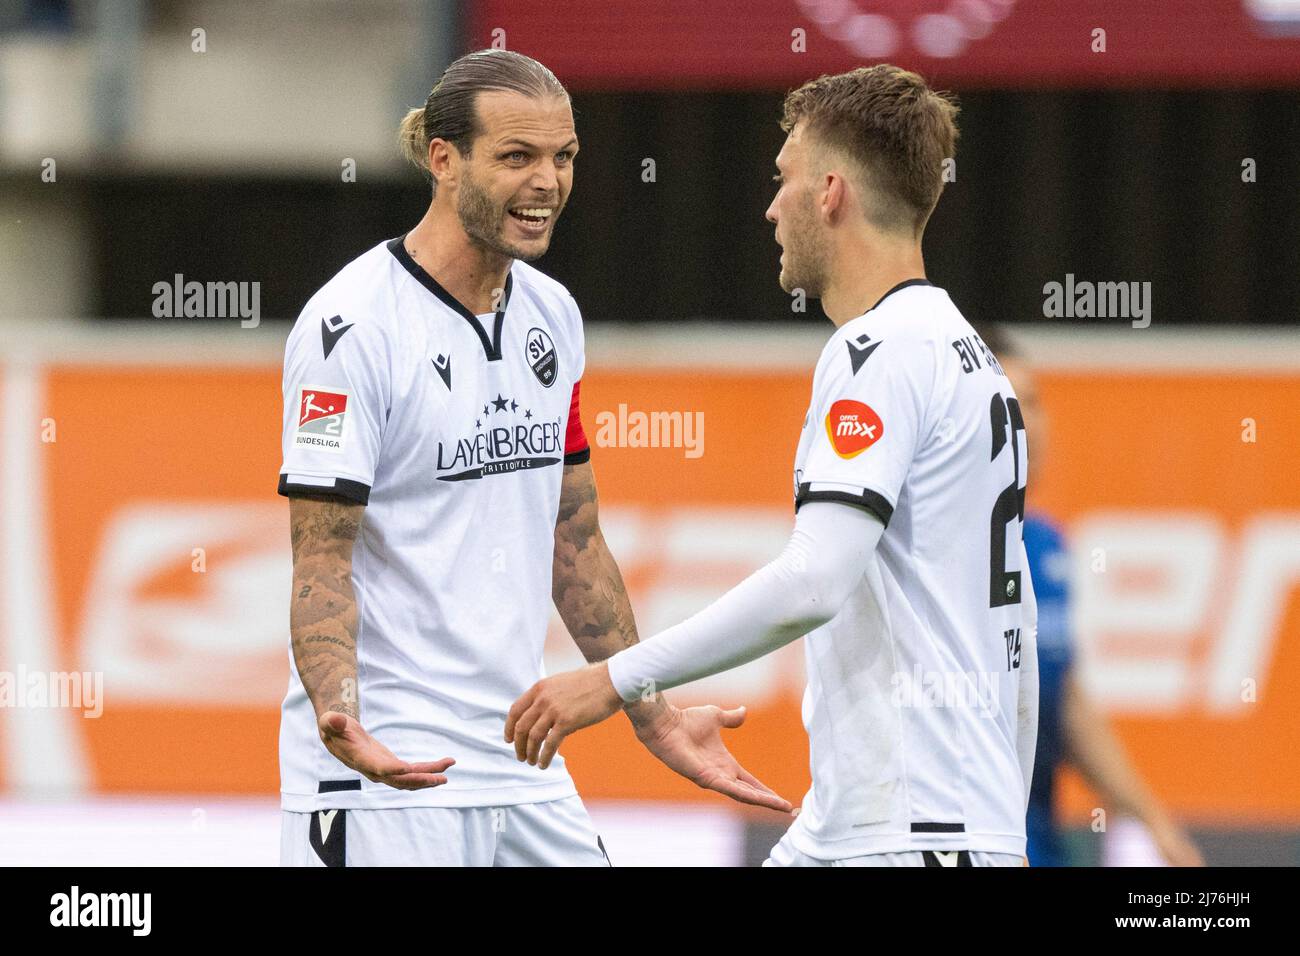 06 May 2022, North Rhine-Westphalia, Paderborn: Soccer: 2. Bundesliga, SC Paderborn 07 - SV Sandhausen, Matchday 33, Benteler-Arena: Sandhausen's Dennis Diekmeier (l) scolds Sandhausen's Tom Trybull after scoring the 2-0 goal. Photo: David Inderlied/dpa - IMPORTANT NOTE: In accordance with the requirements of the DFL Deutsche Fußball Liga and the DFB Deutscher Fußball-Bund, it is prohibited to use or have used photographs taken in the stadium and/or of the match in the form of sequence pictures and/or video-like photo series. Stock Photo